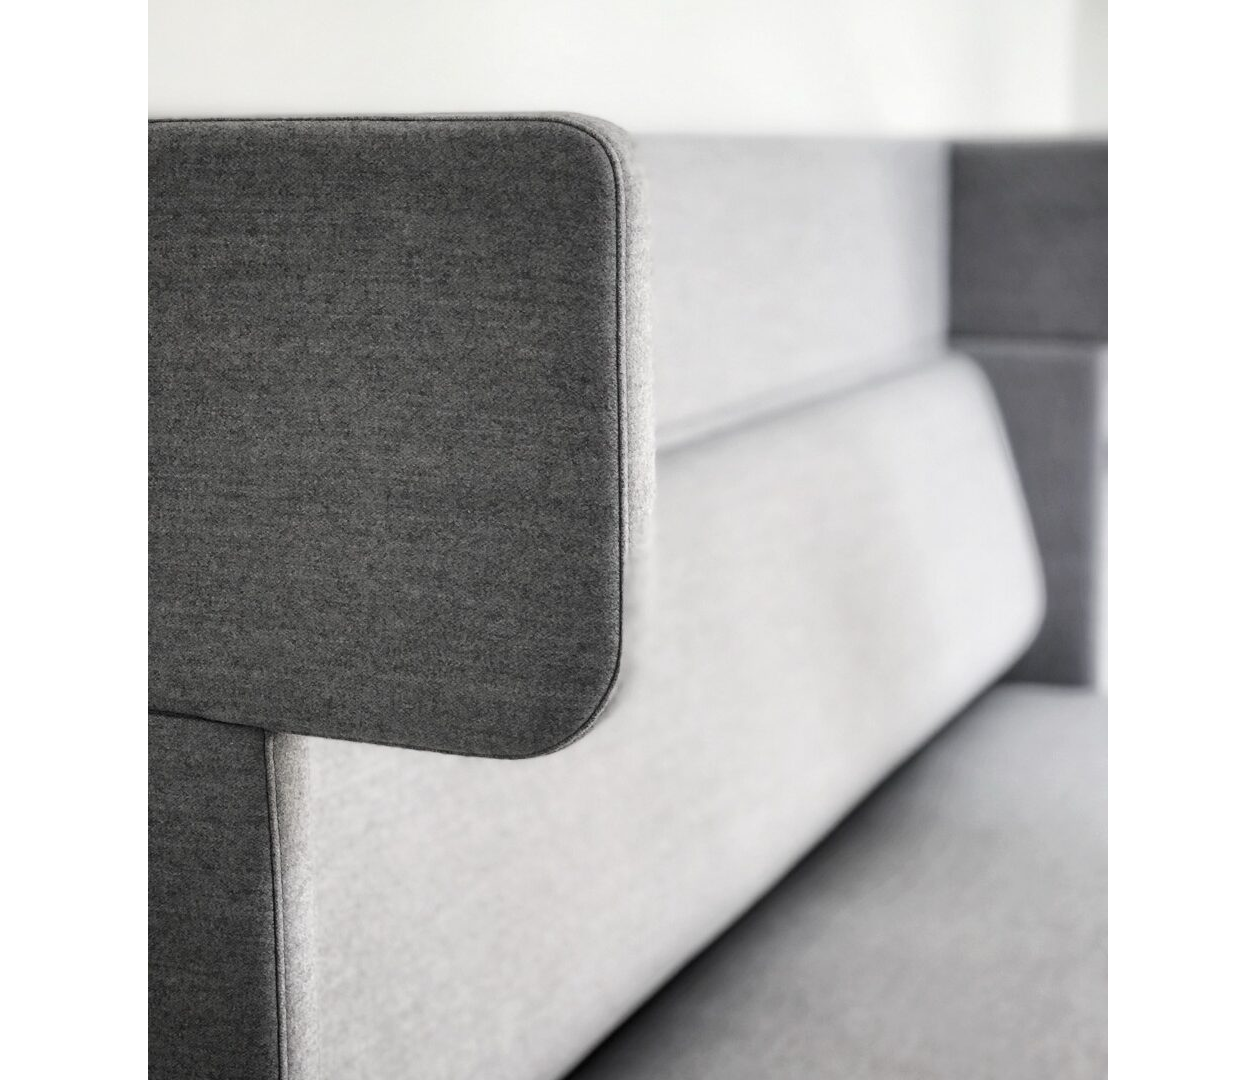 OCEE_FOUR - Soft Seating - FourUs - Details Image Large 2